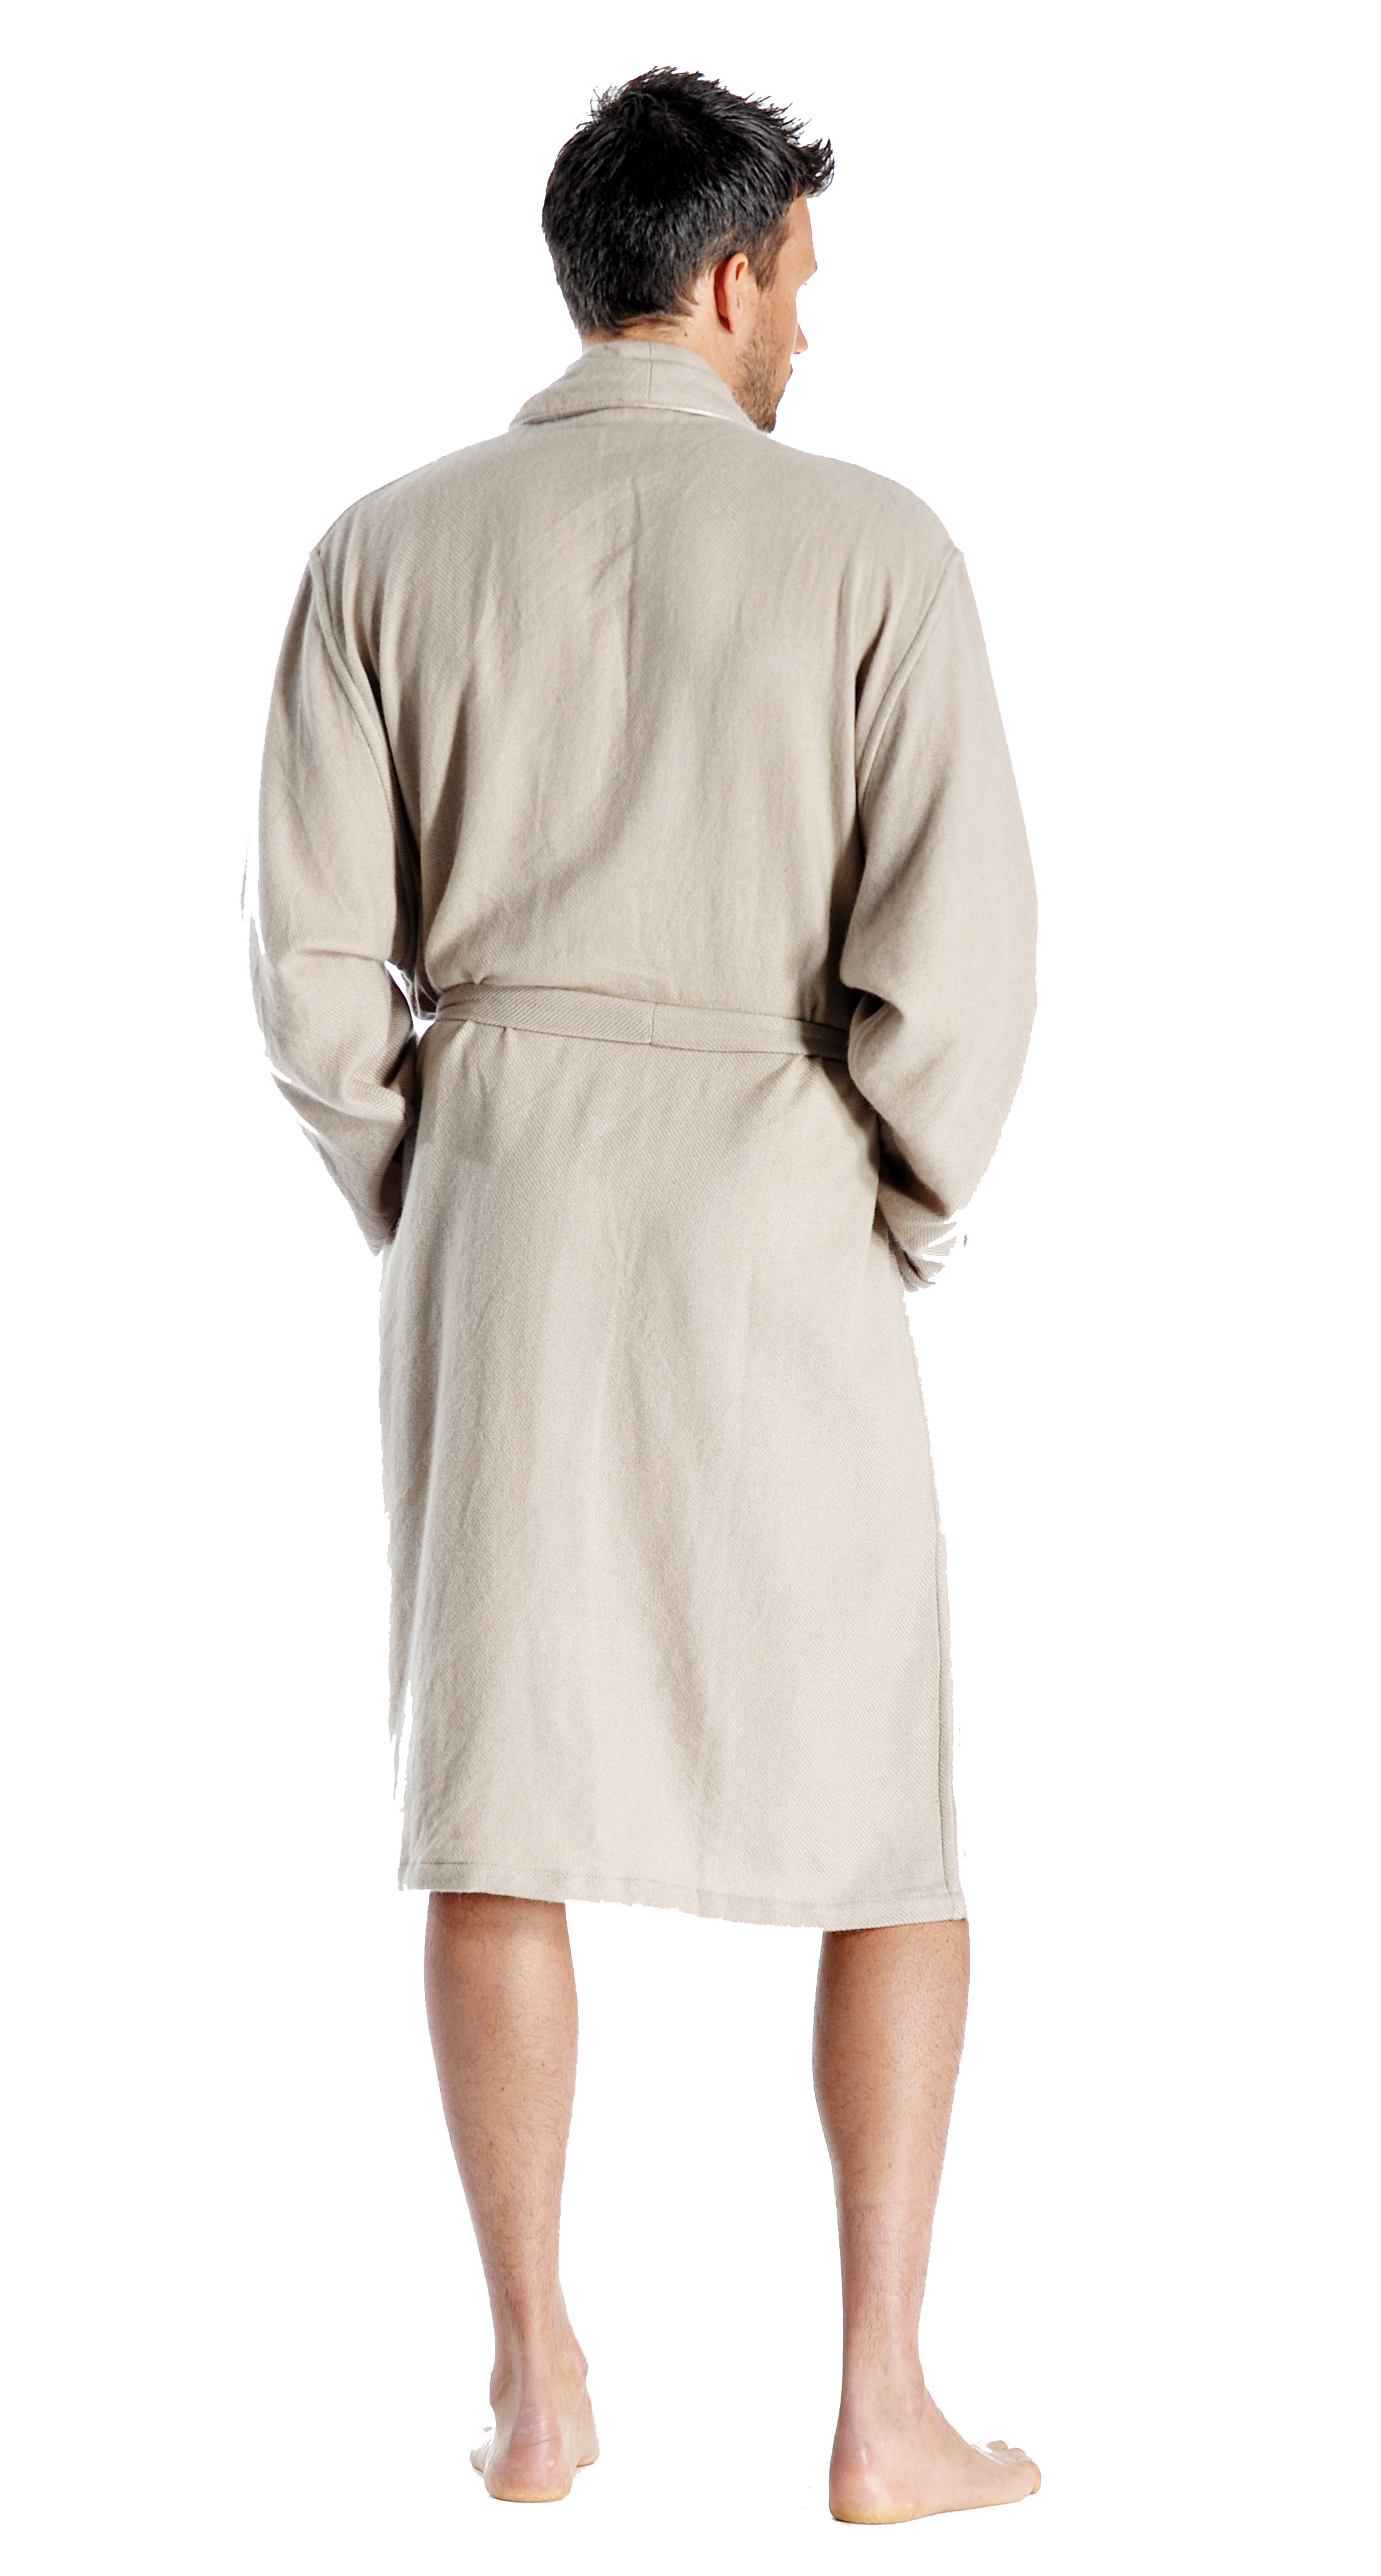 Pure Cashmere Knee Length Robe for Men (Charcoal, Large/Extra Large)